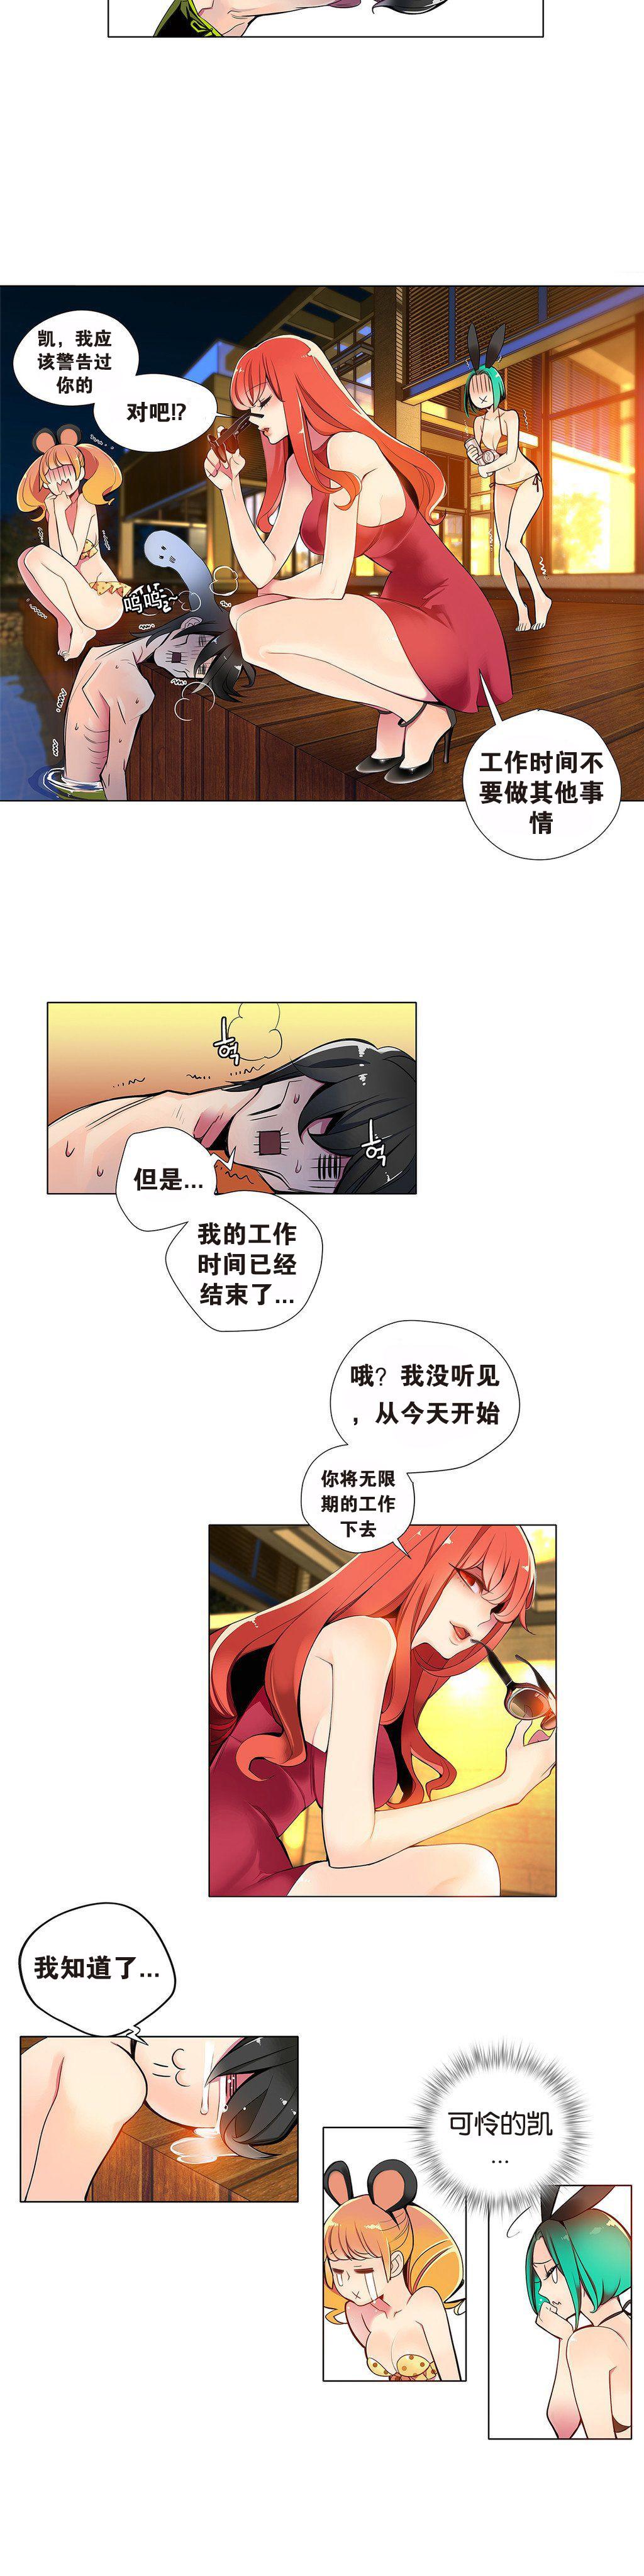 [Juder] 莉莉丝的纽带(Lilith`s Cord) Ch.1-15 [Chinese] 96